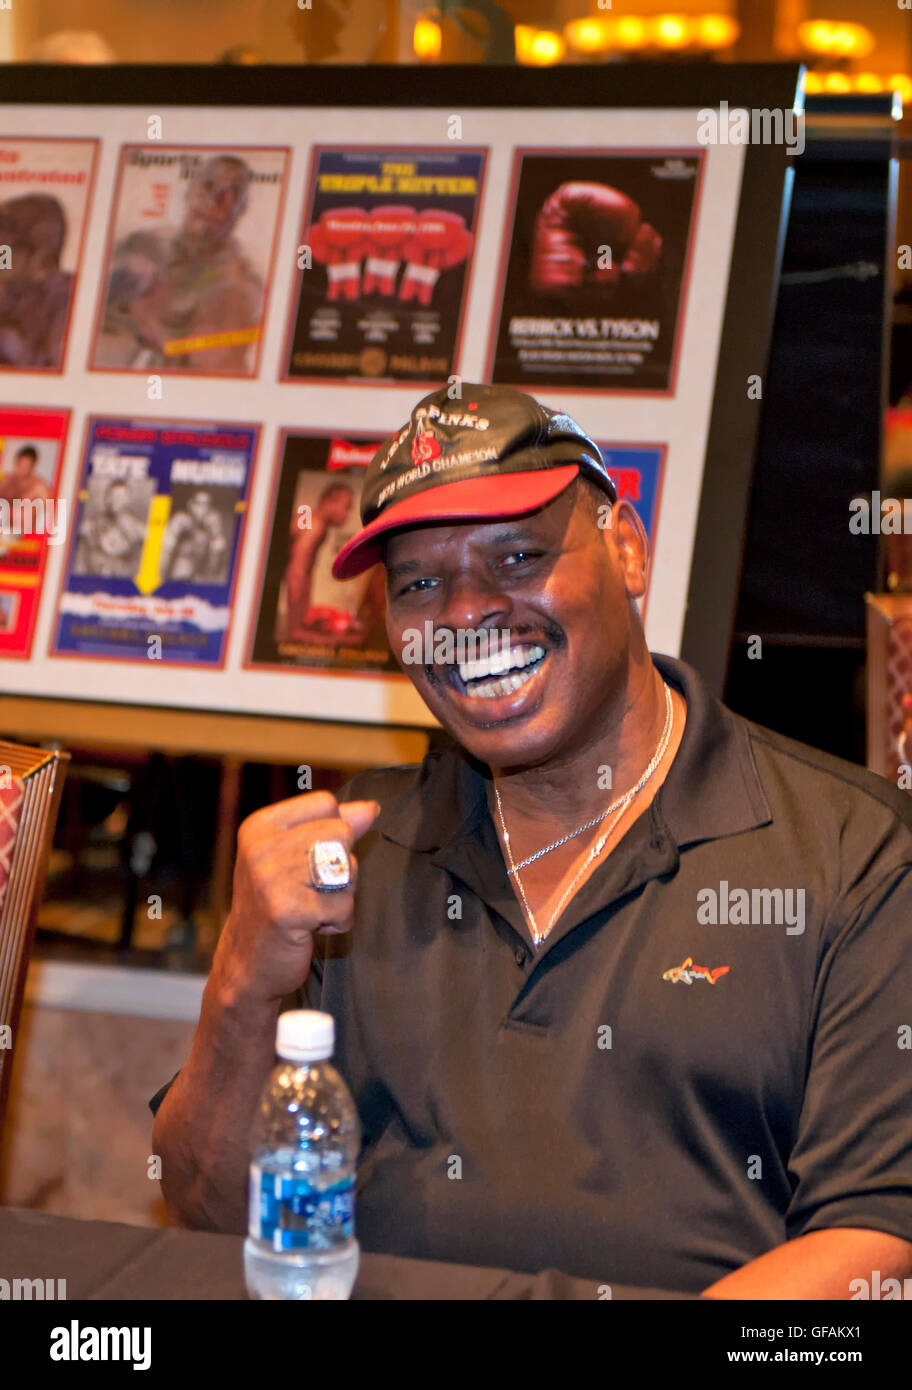 29, July 2016, Las Vegas, Nevada, The NVBHOF held a Meet and Greet the day before the induction ceremony at Caesars Palace where fans could get pictures and autographs with their favorite boxers. Leon Spinks 2-Time Heavyweight World Champion Stock Photo